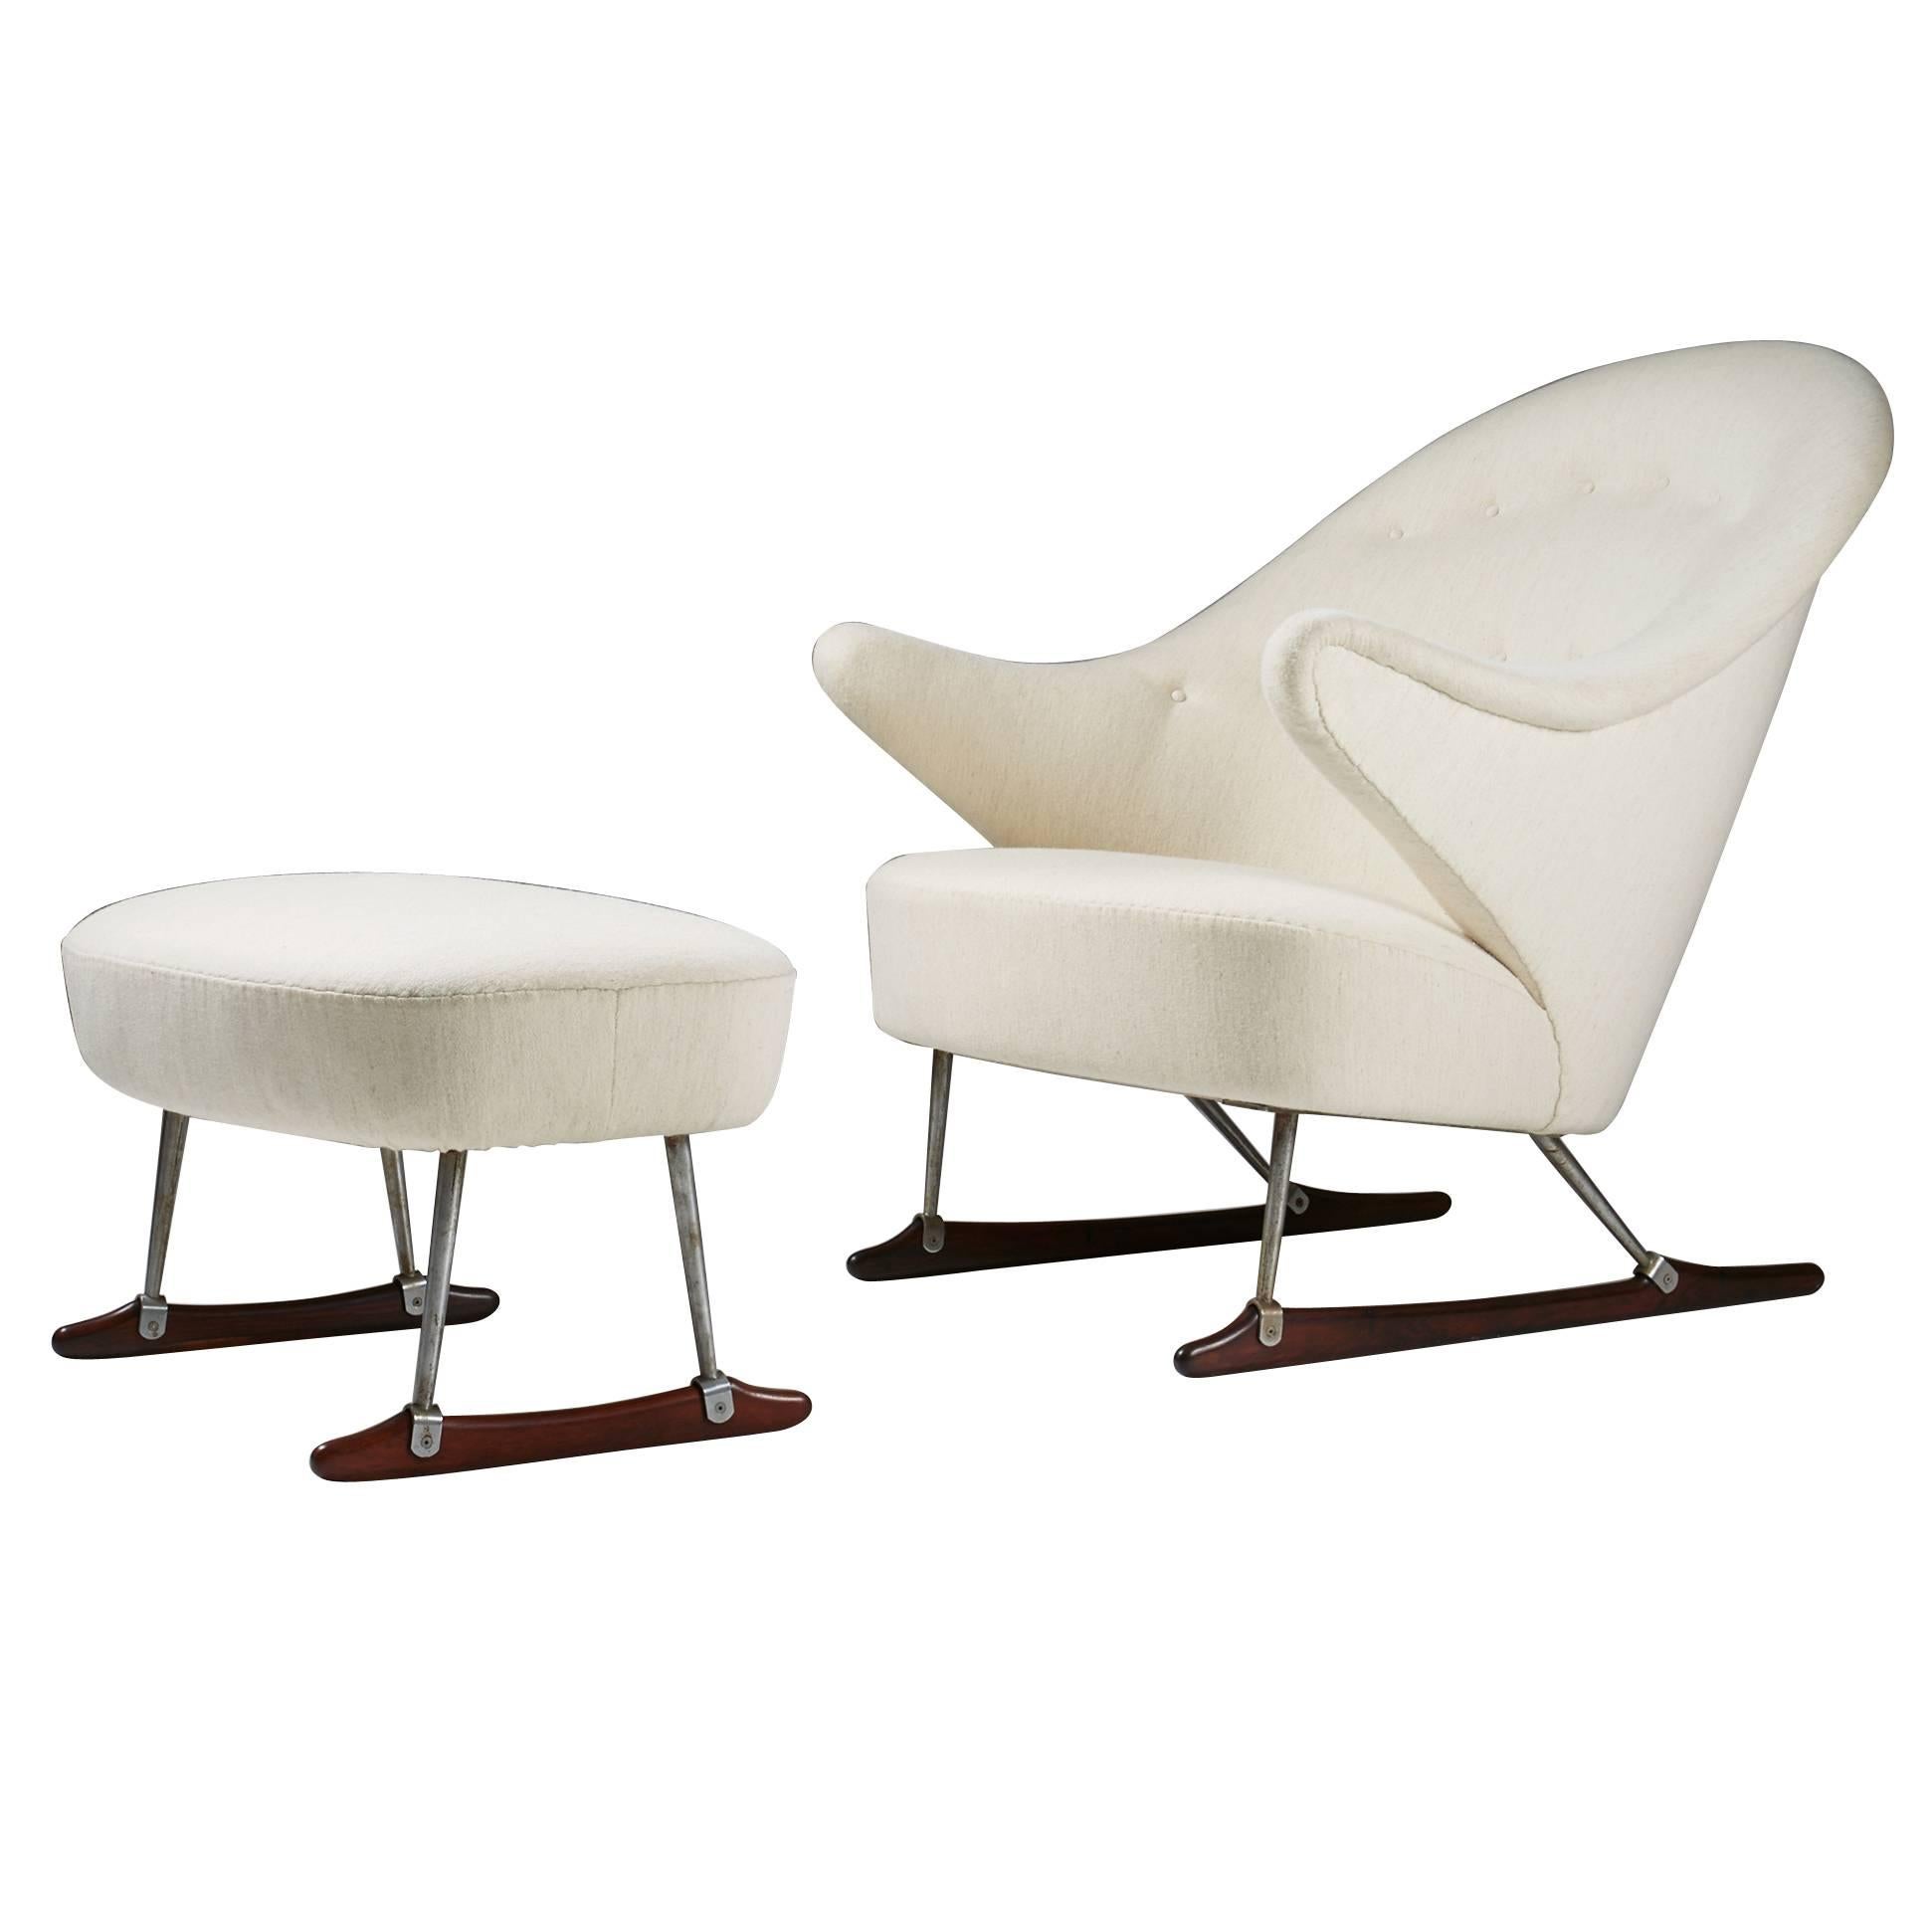 Sleigh Chair and footstool by Børge Mogensen for Tage M Christensen & Co, 1953